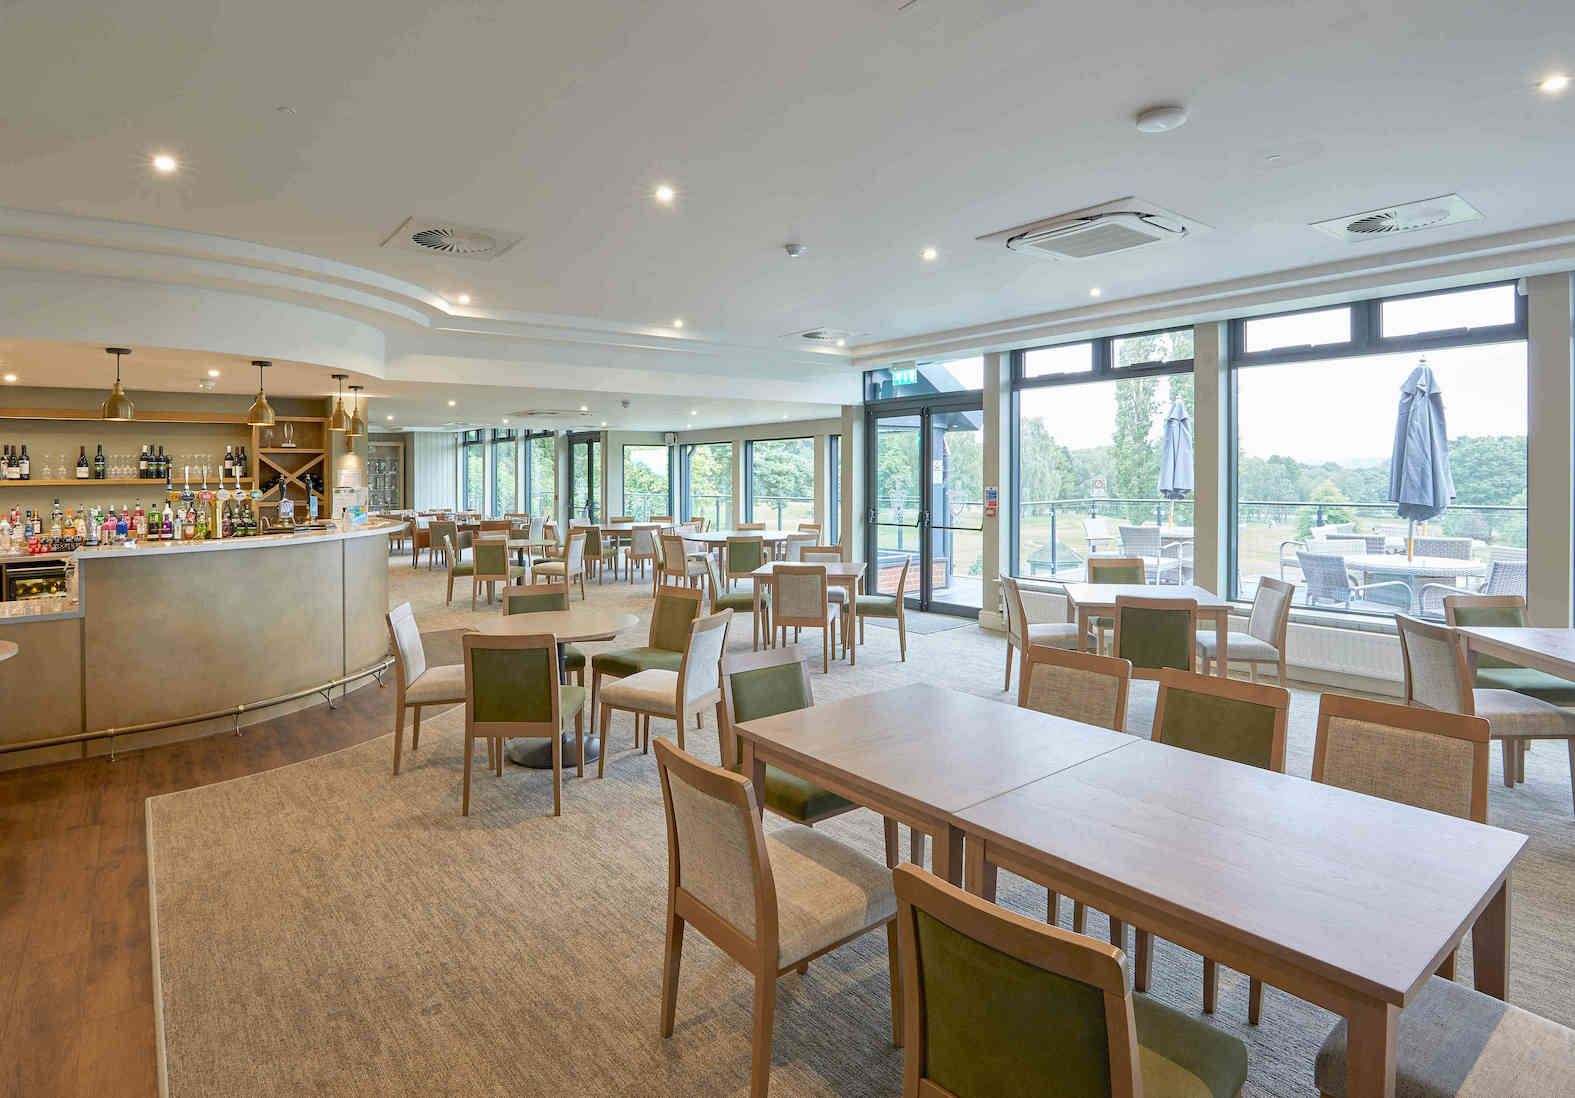 The revamped Walmley Golf Club clubhouse